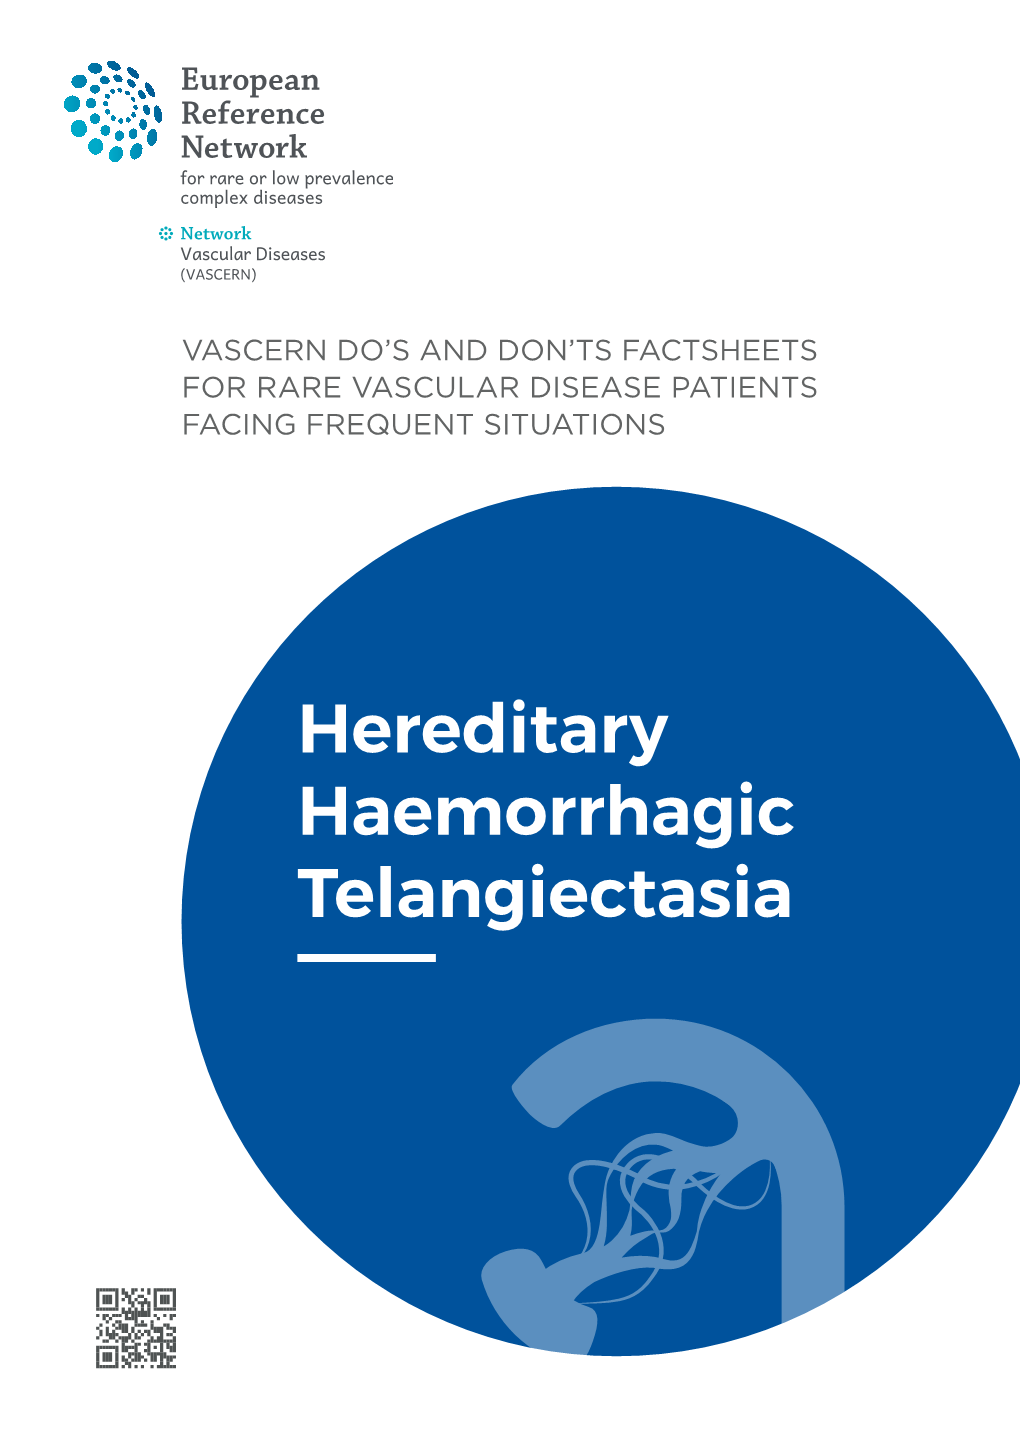 Hereditary Haemorrhagic Telangiectasia Co-Funded by the Health Programme of the European Union